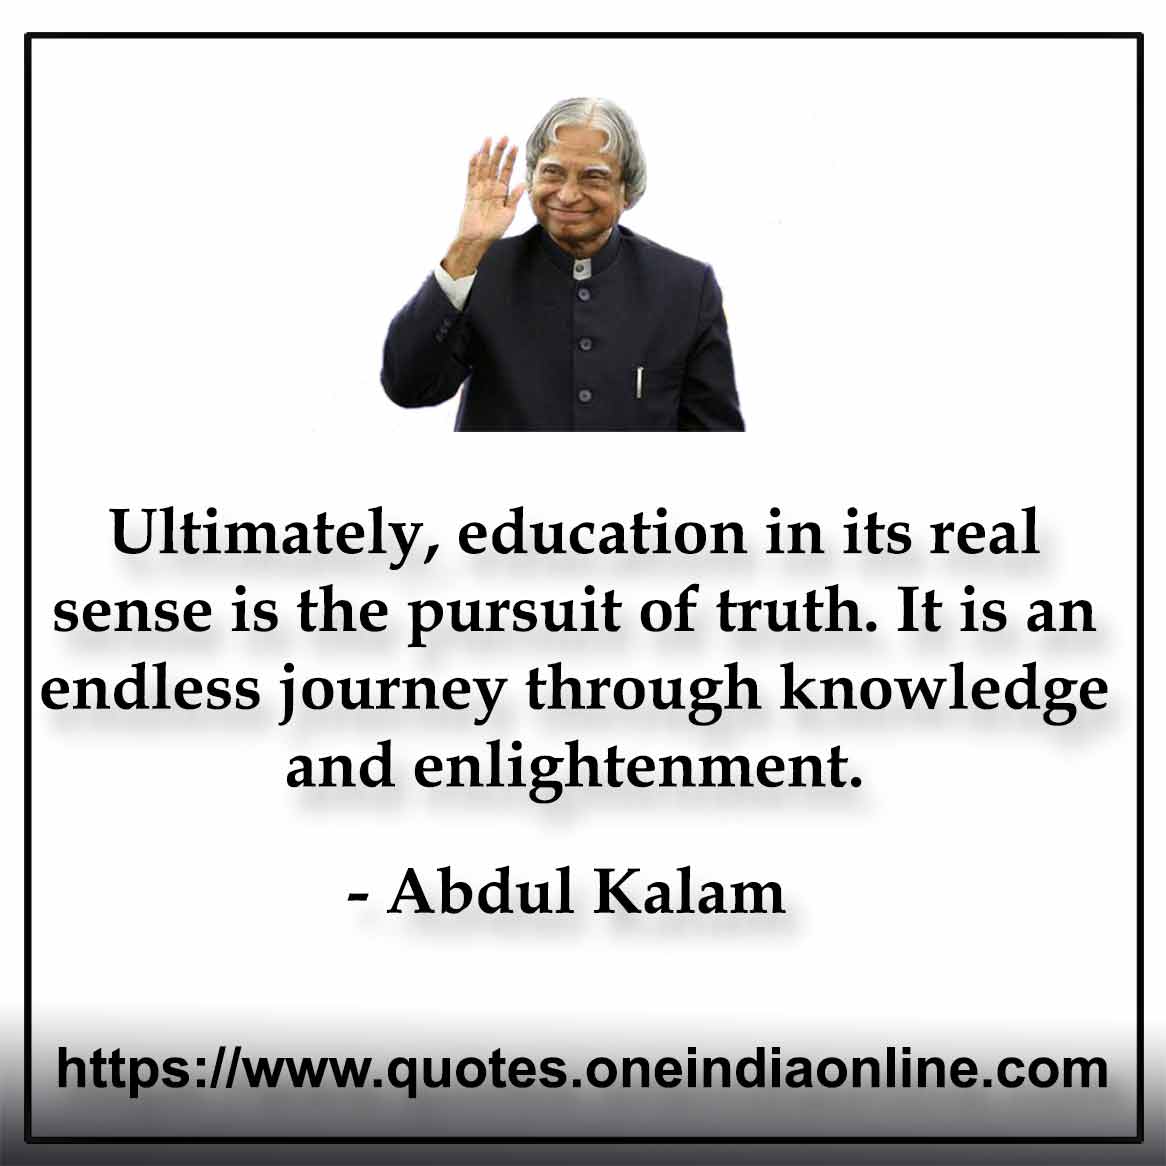 Ultimately, education in its real sense is the pursuit of truth. It is an endless journey through knowledge and enlightenment.